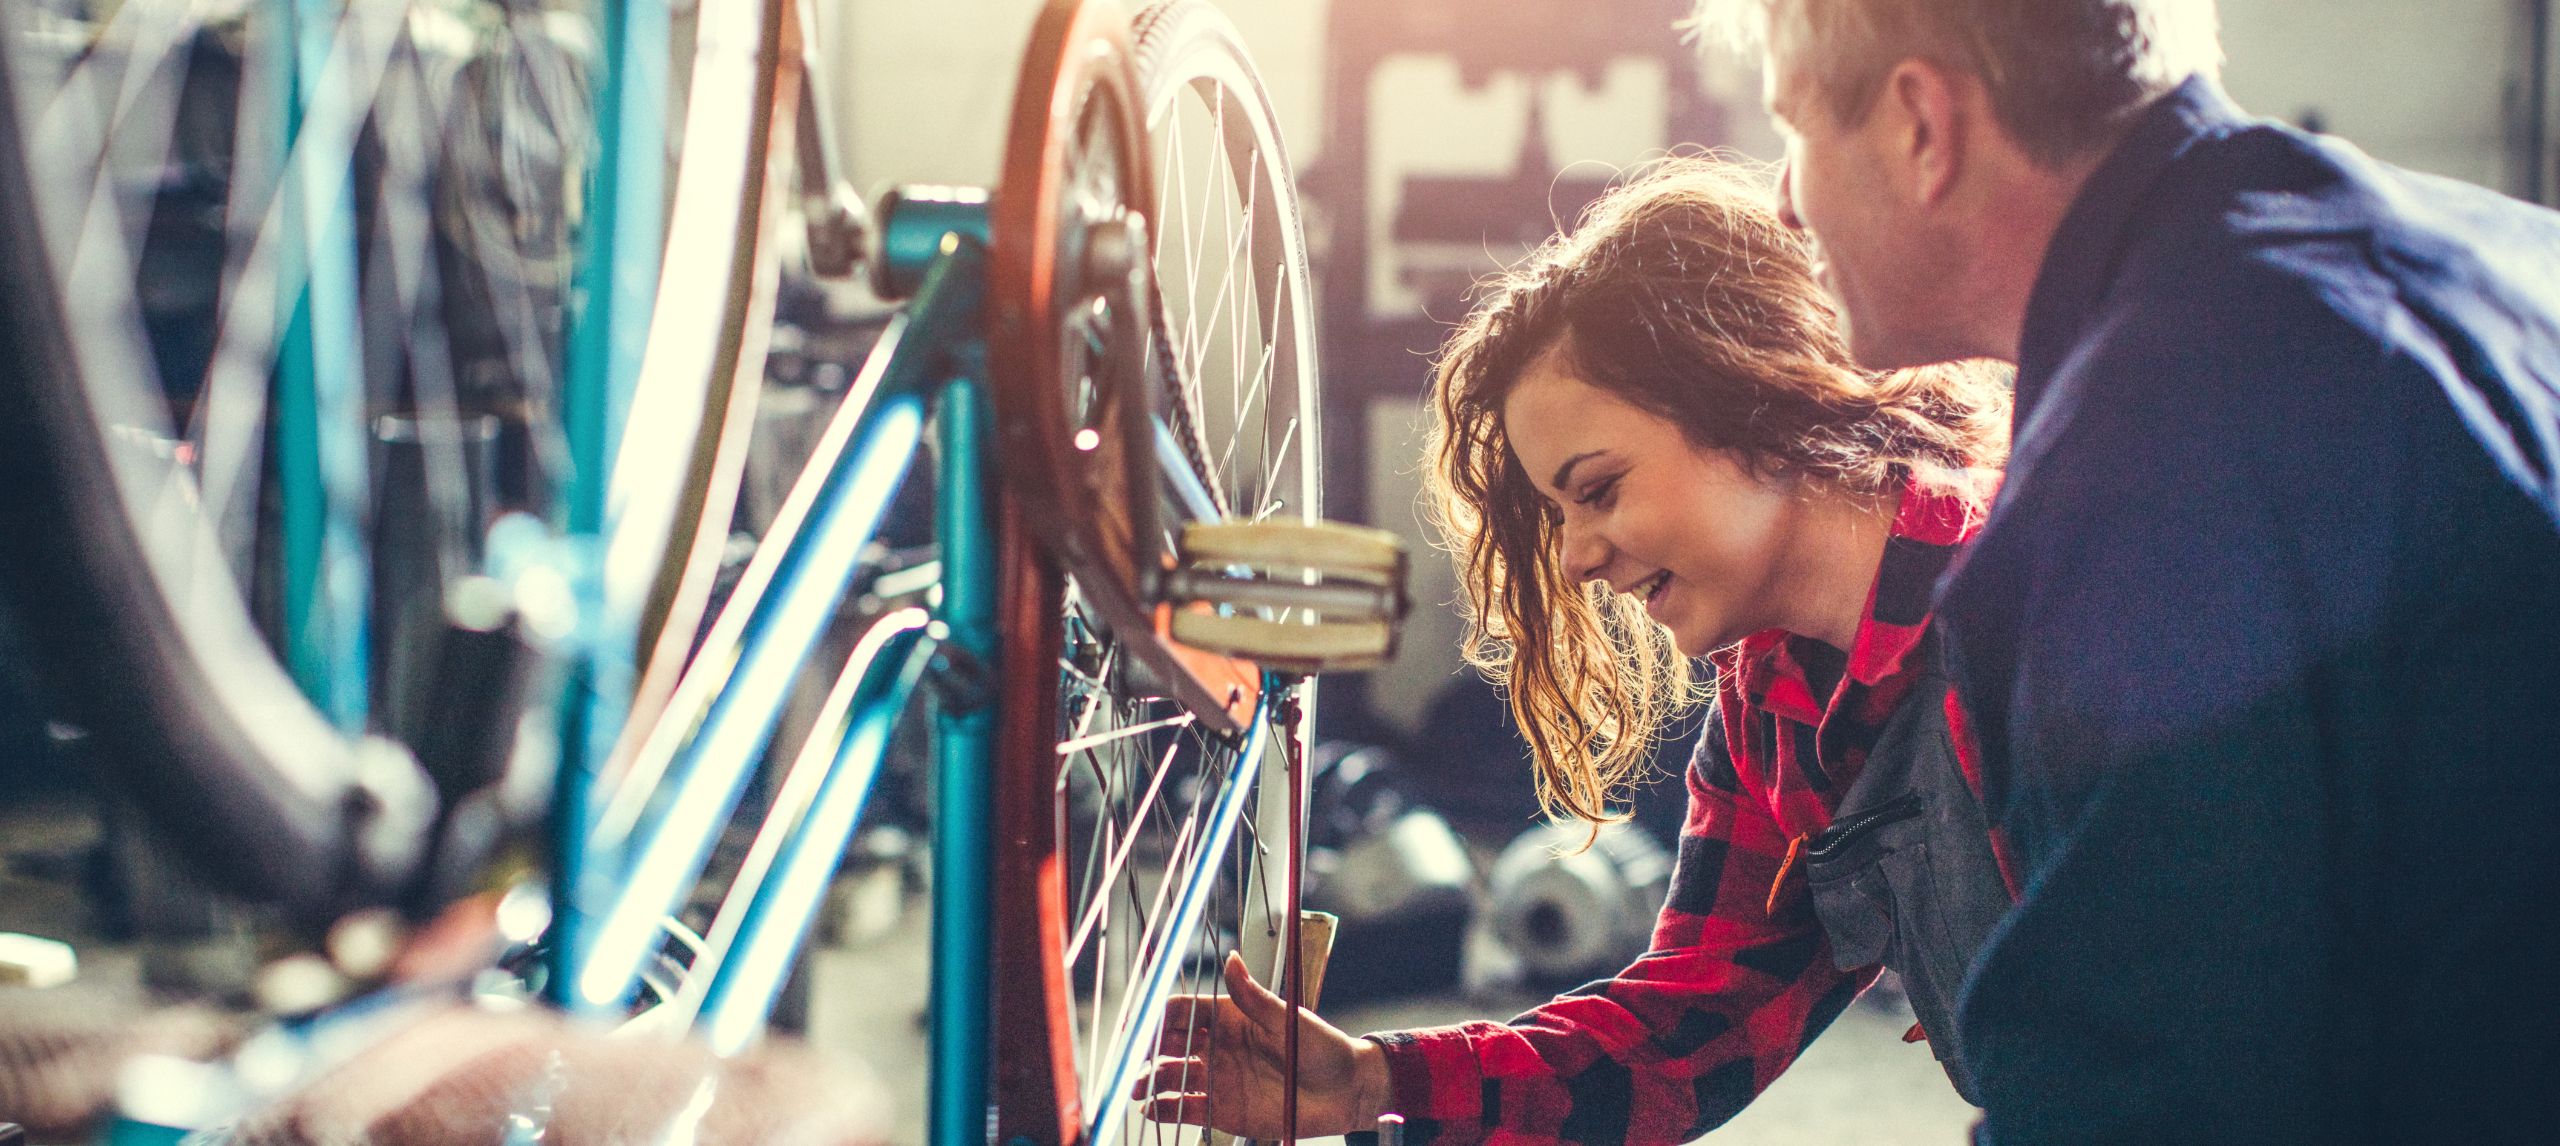 Young woman and man working on fixing a bike in a bike shop